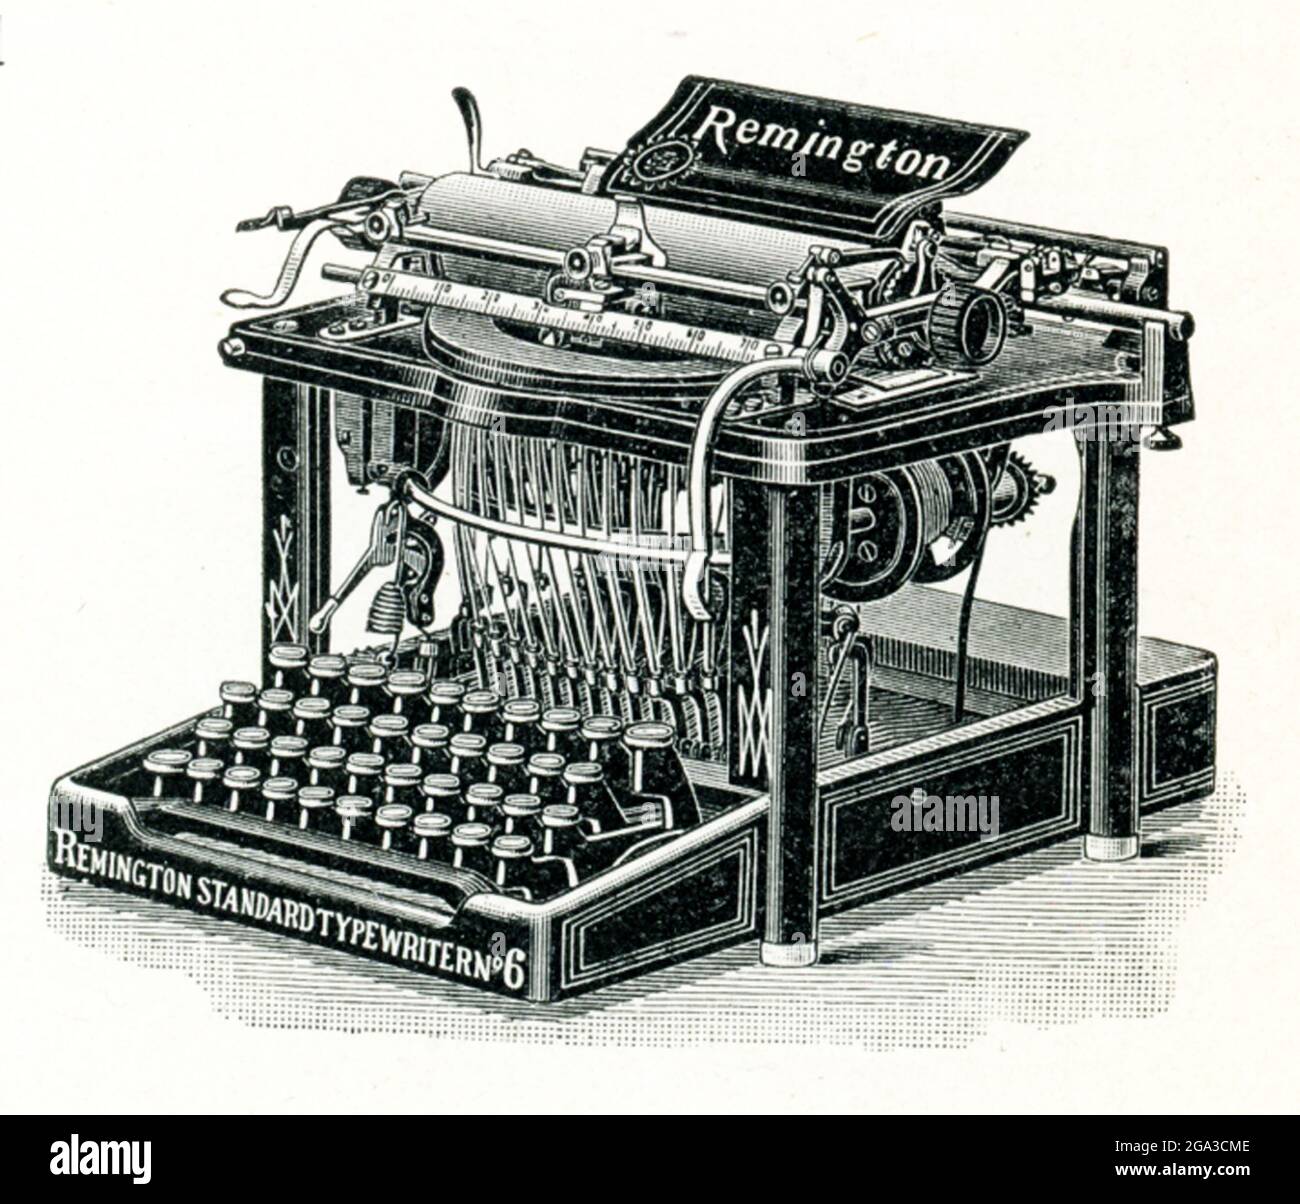 This Remington Standard Model Number 6 typewriter was manufactured by the Remington Standard Typewriter Company around 1894. The Model Number 6 contained many improvements to Remington’s previous models including an improved cylinder, improved spacing mechanism, improved paper carriage, and adjustable paper guides. Many of these improvements were due to the inventiveness of Remington mechanist George B. Webb. Stock Photo